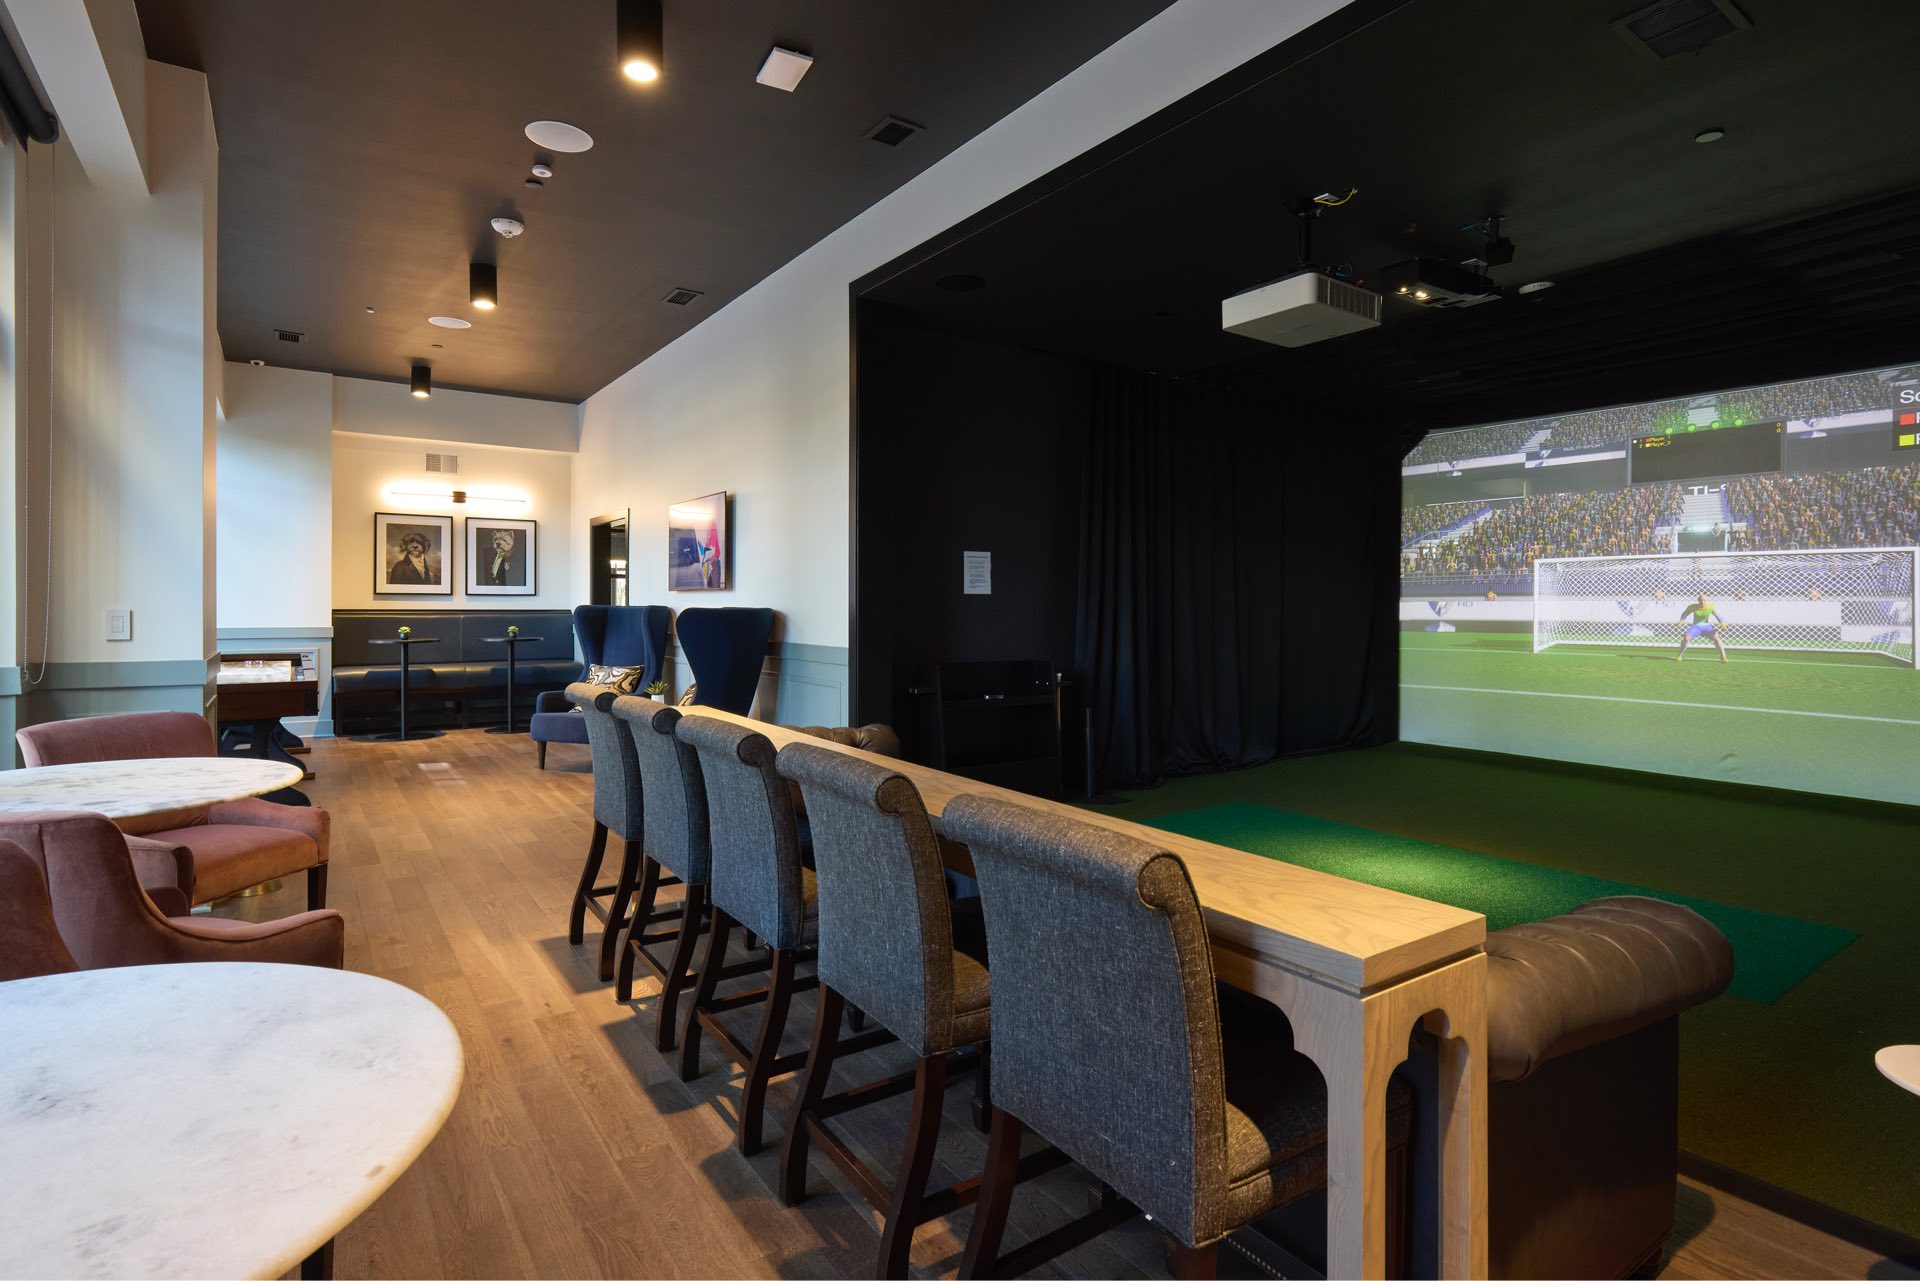 Practice your golf swing in our exclusive social lounge